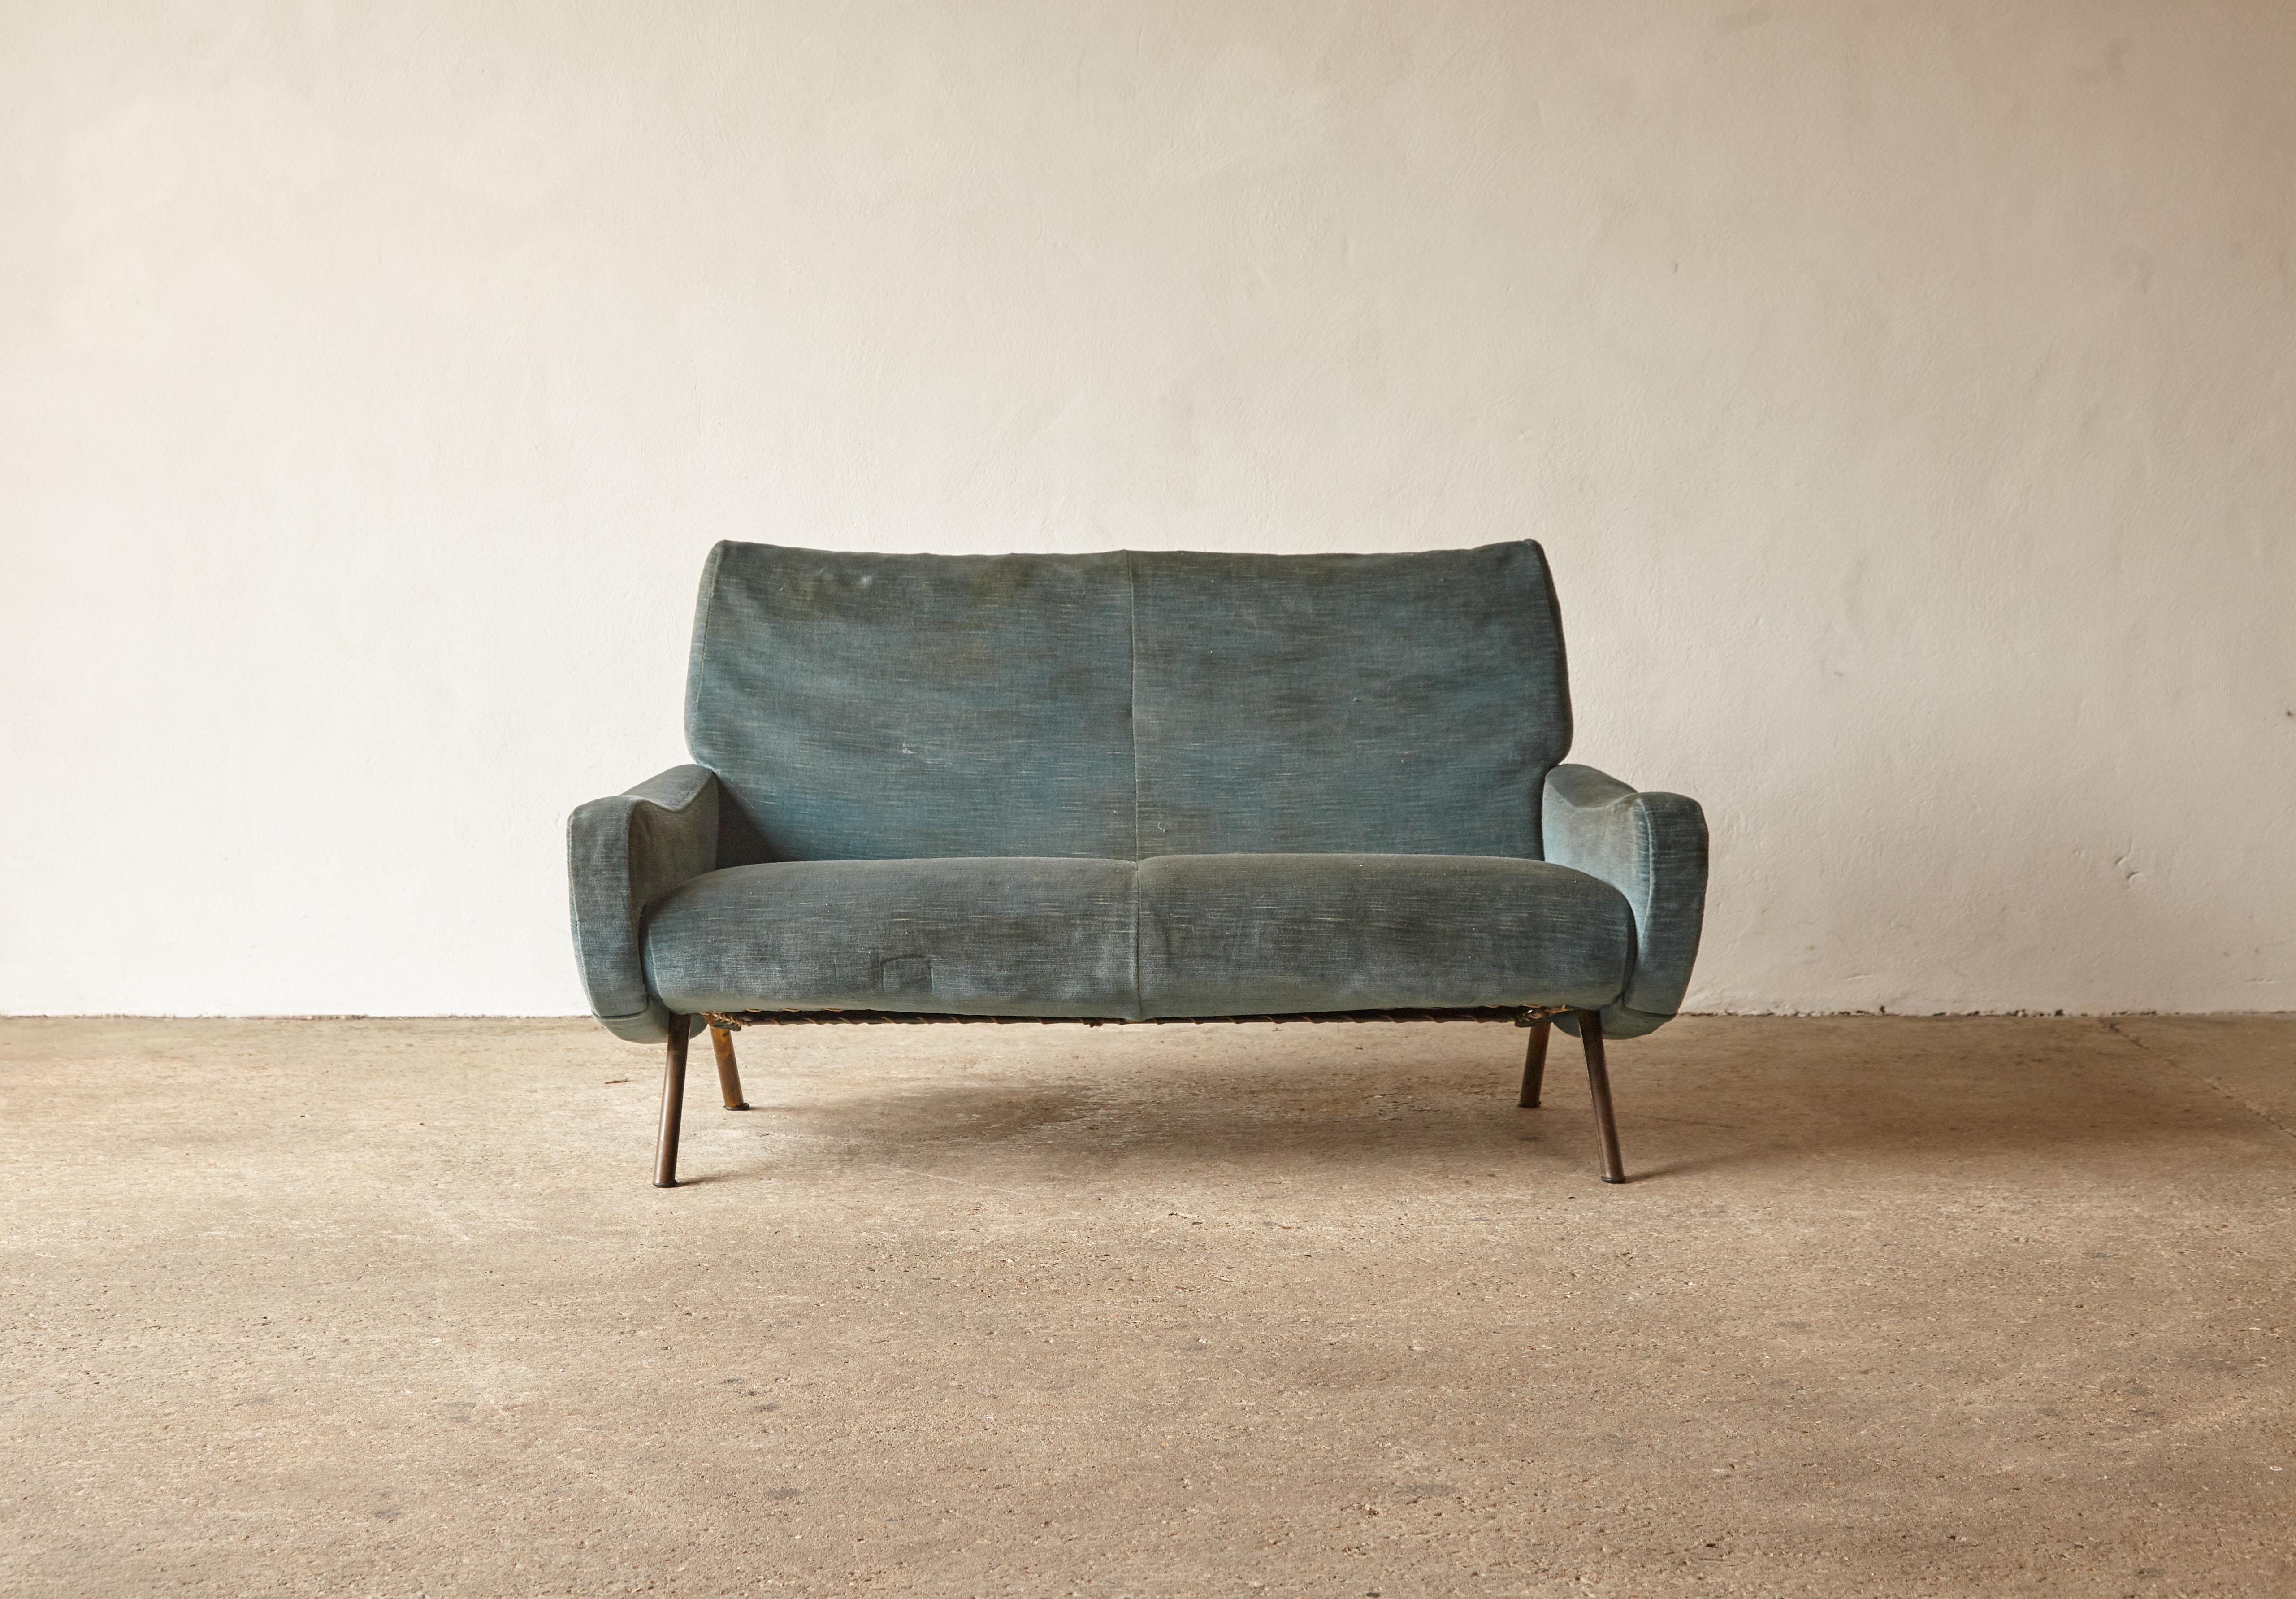 Mid-Century Modern Rare Two-Seat Marco Zanuso Lady Sofa, Arflex, Italy, 1950s/60s for reupholstery